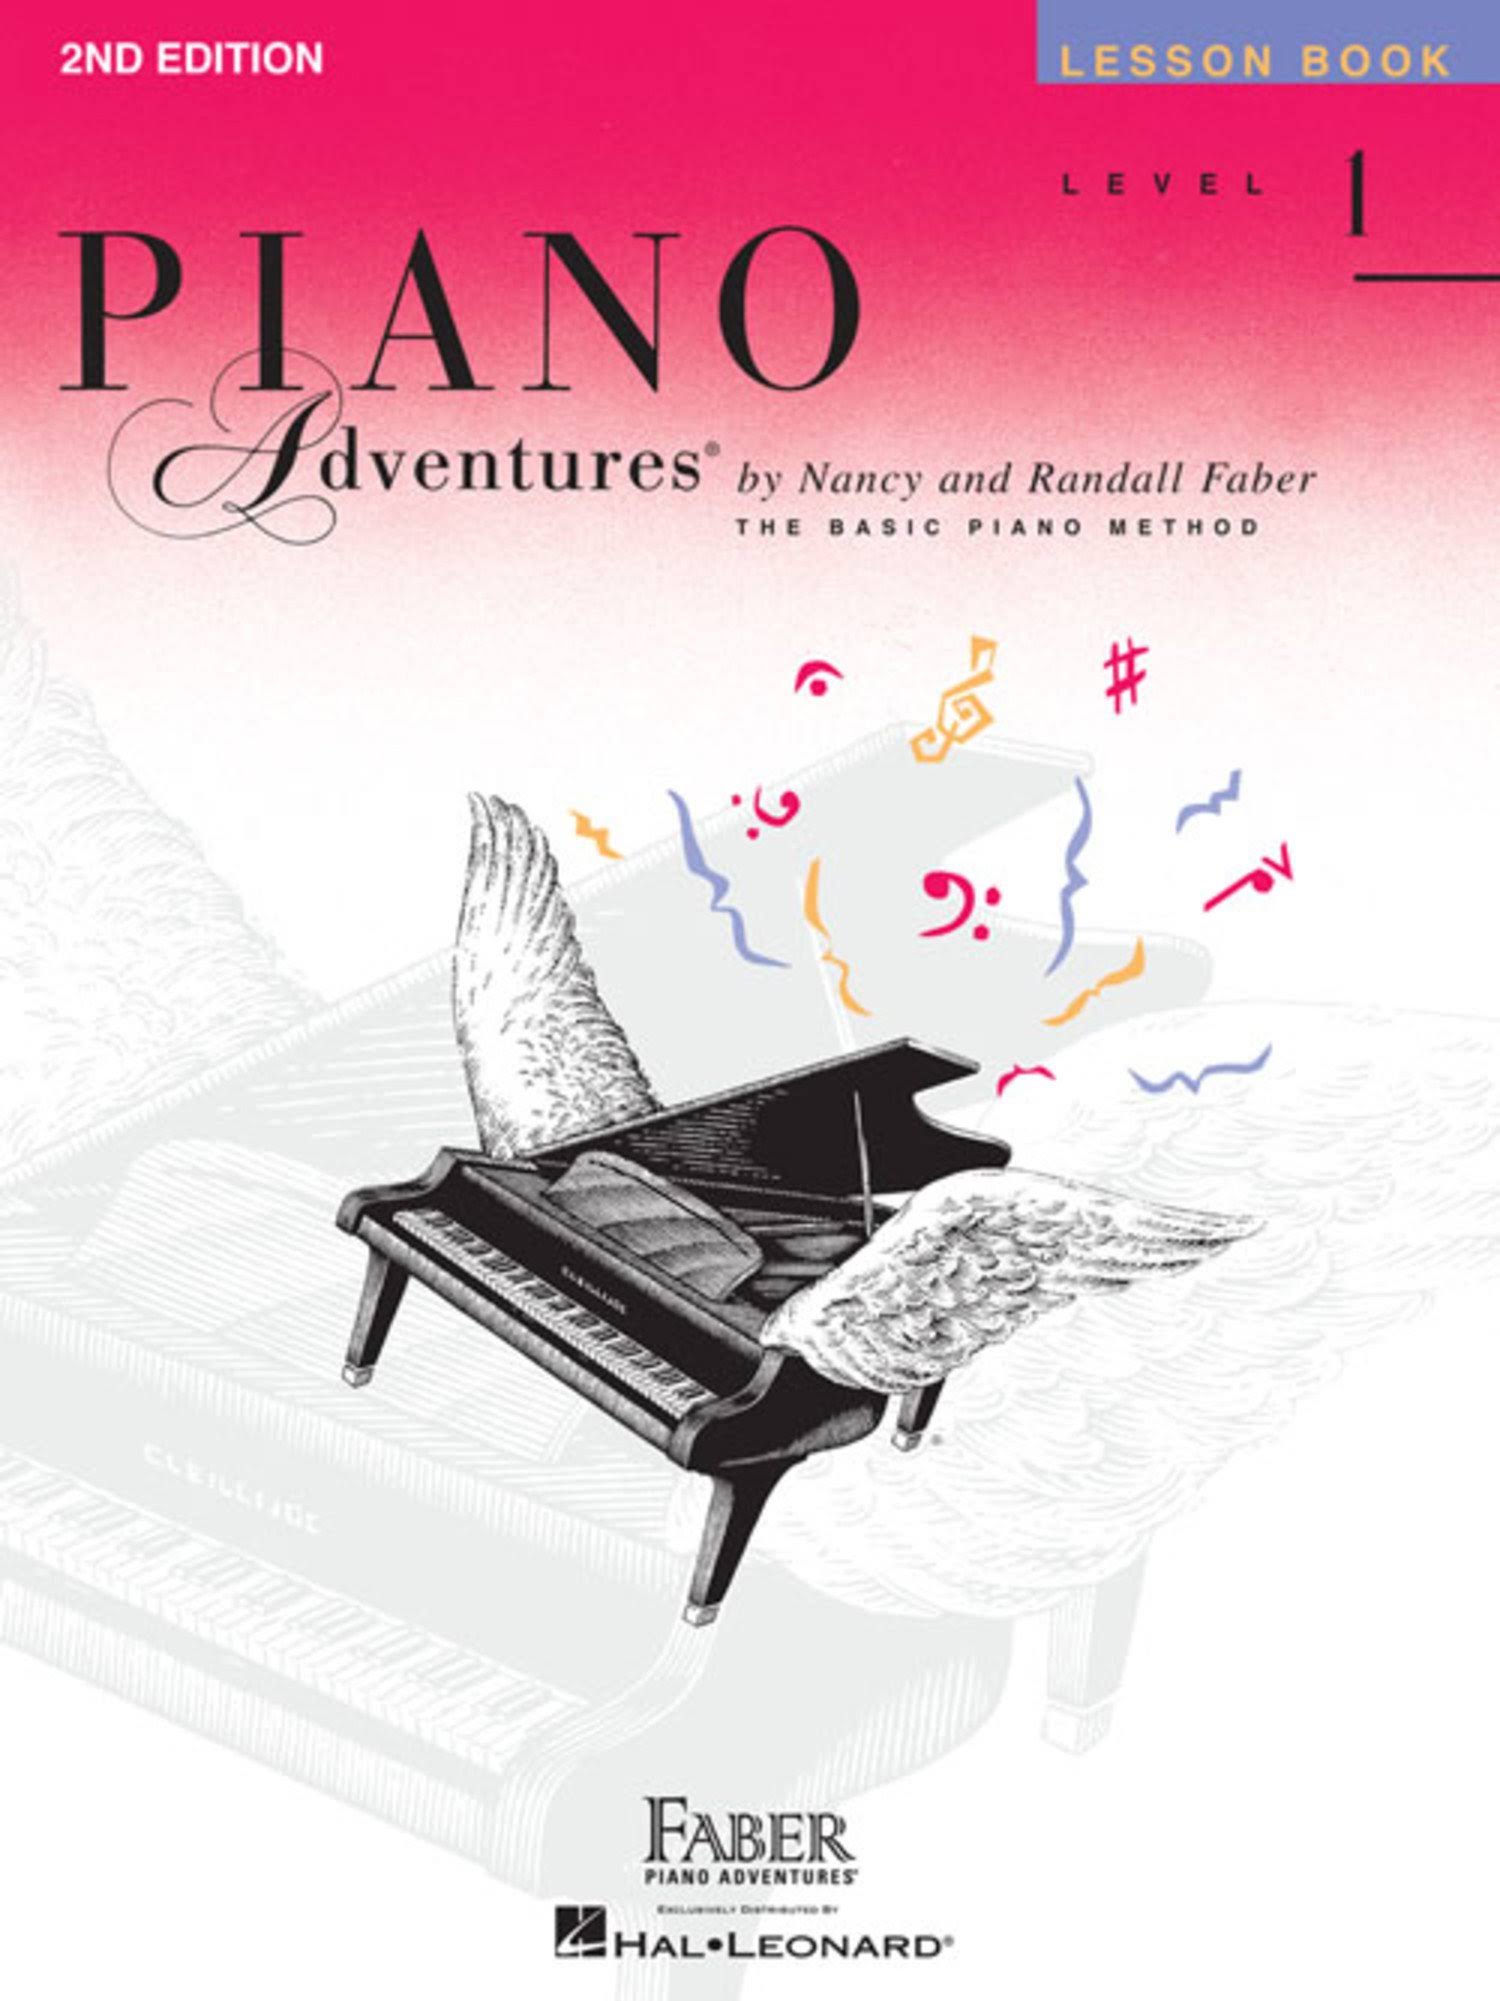 Faber Piano Adventures Lesson Book: Level 1 - Nancy Faber, Randall Faber